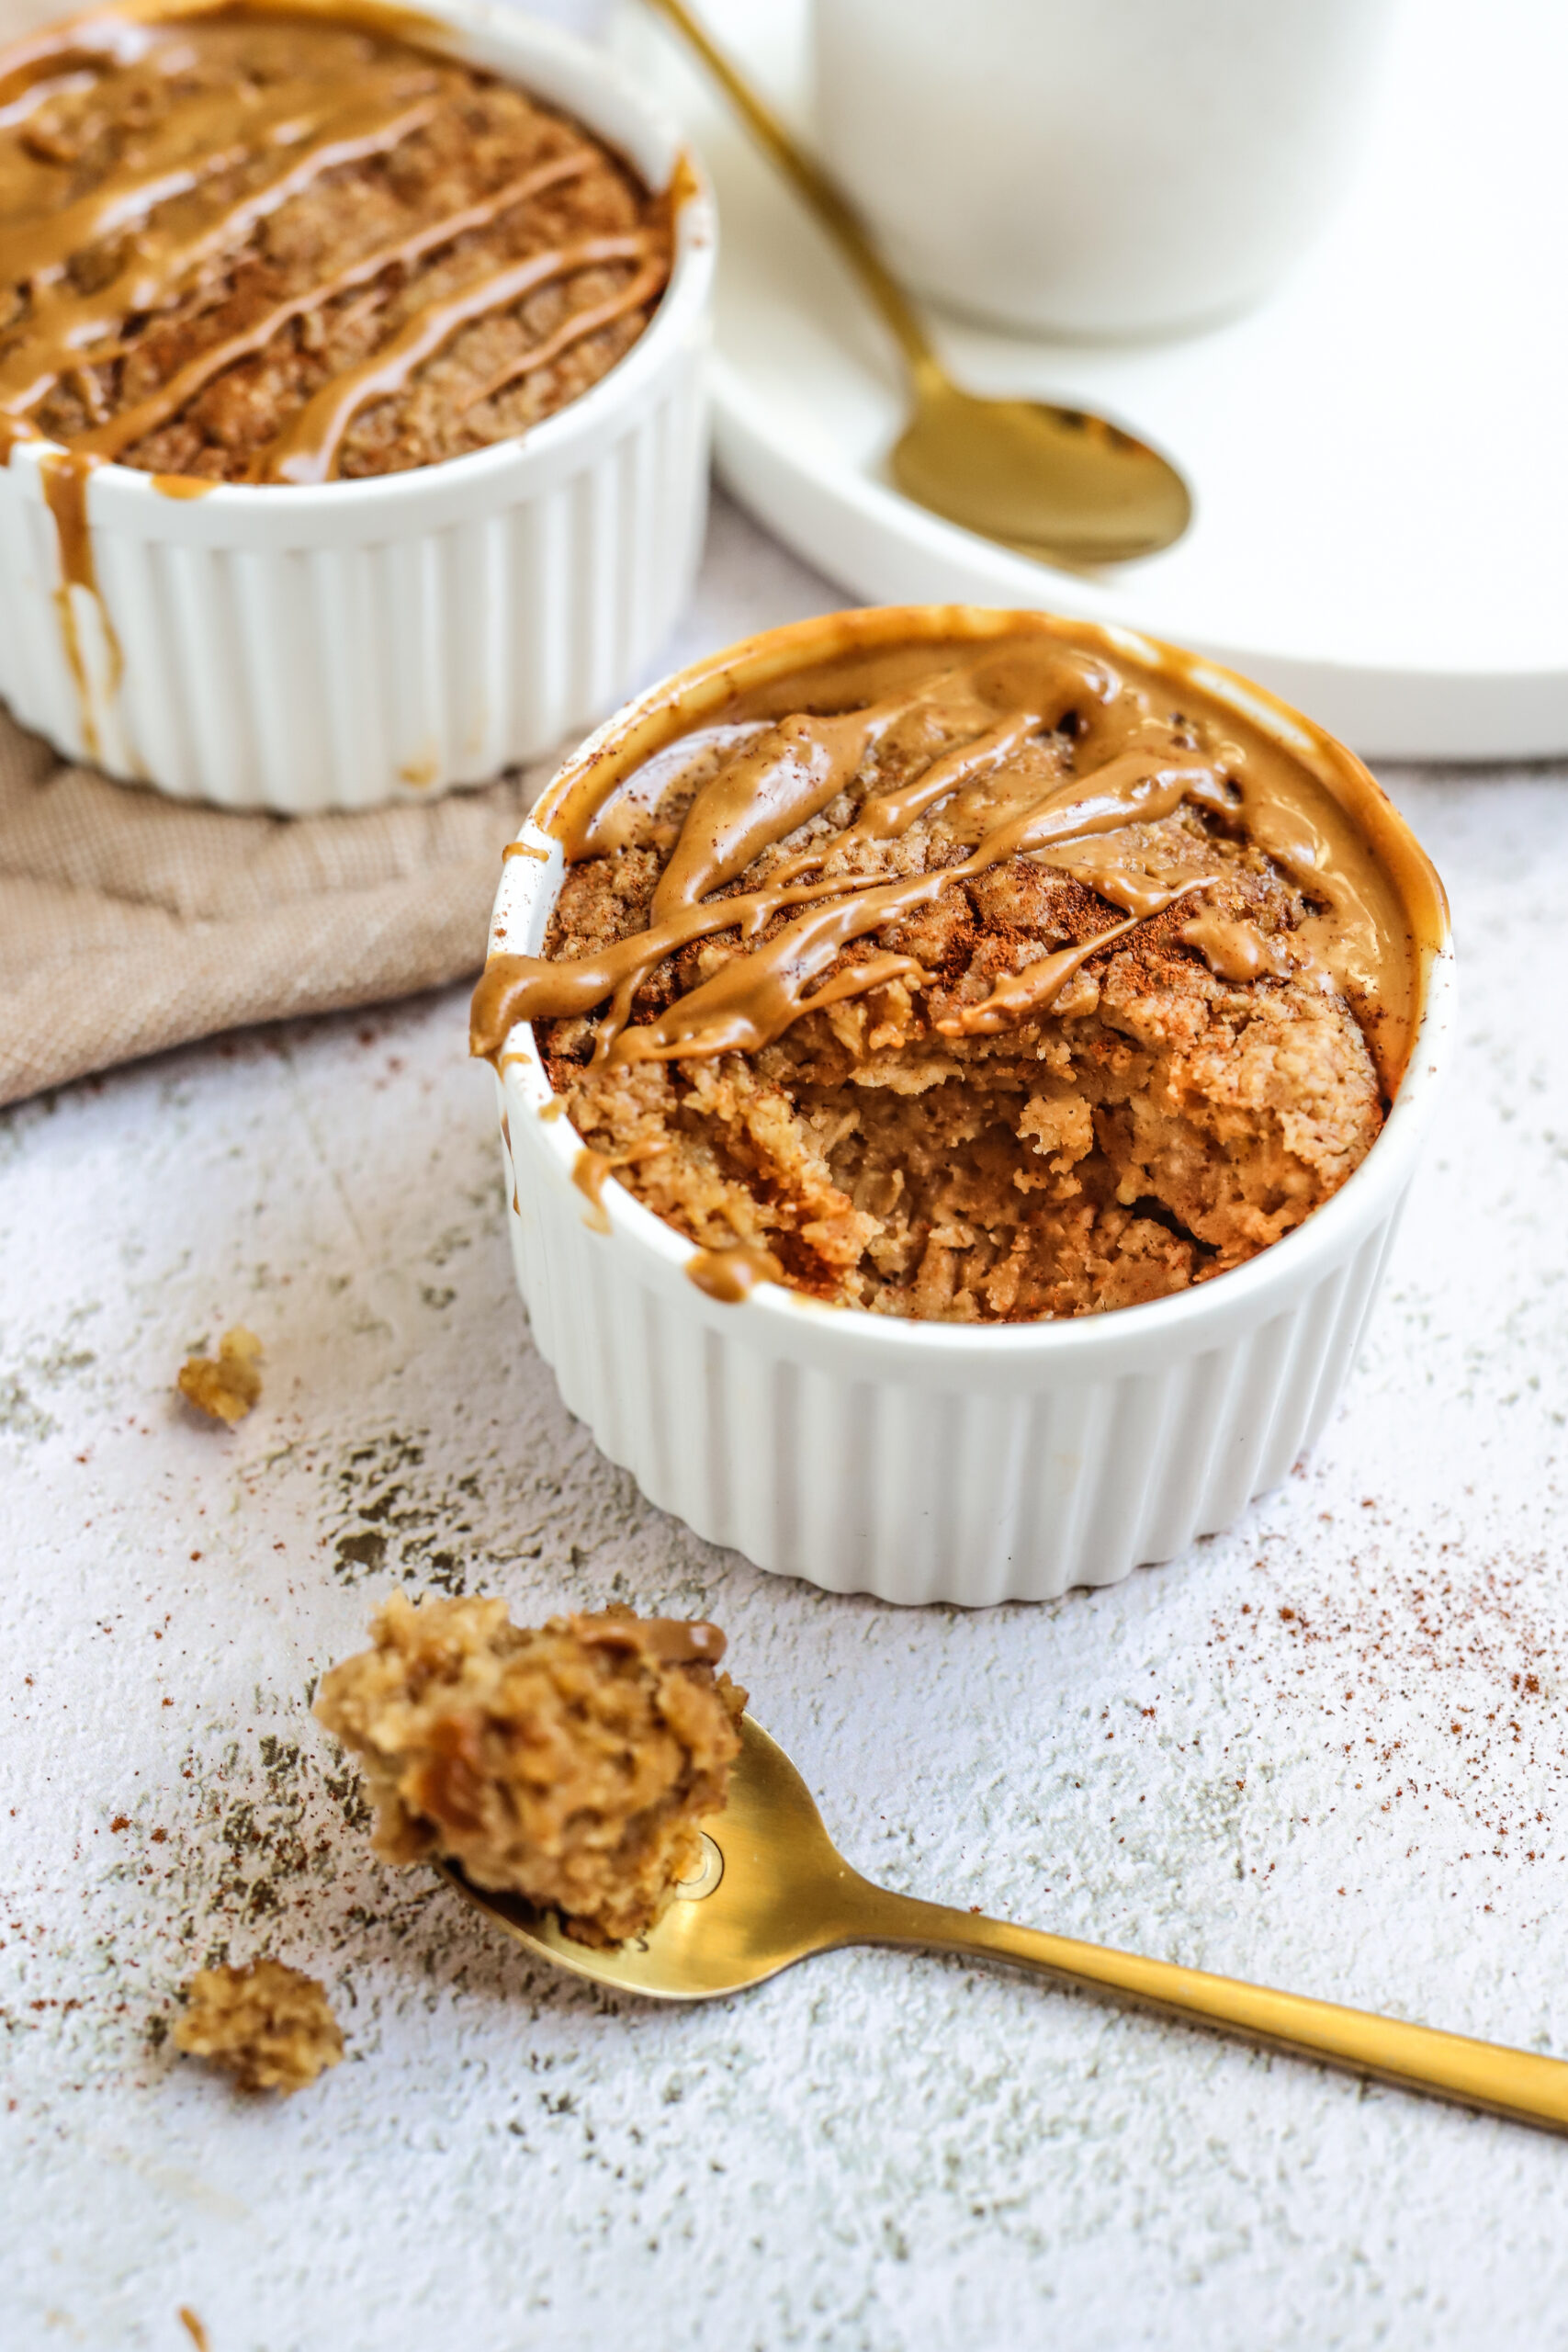 Baked oats speculoos